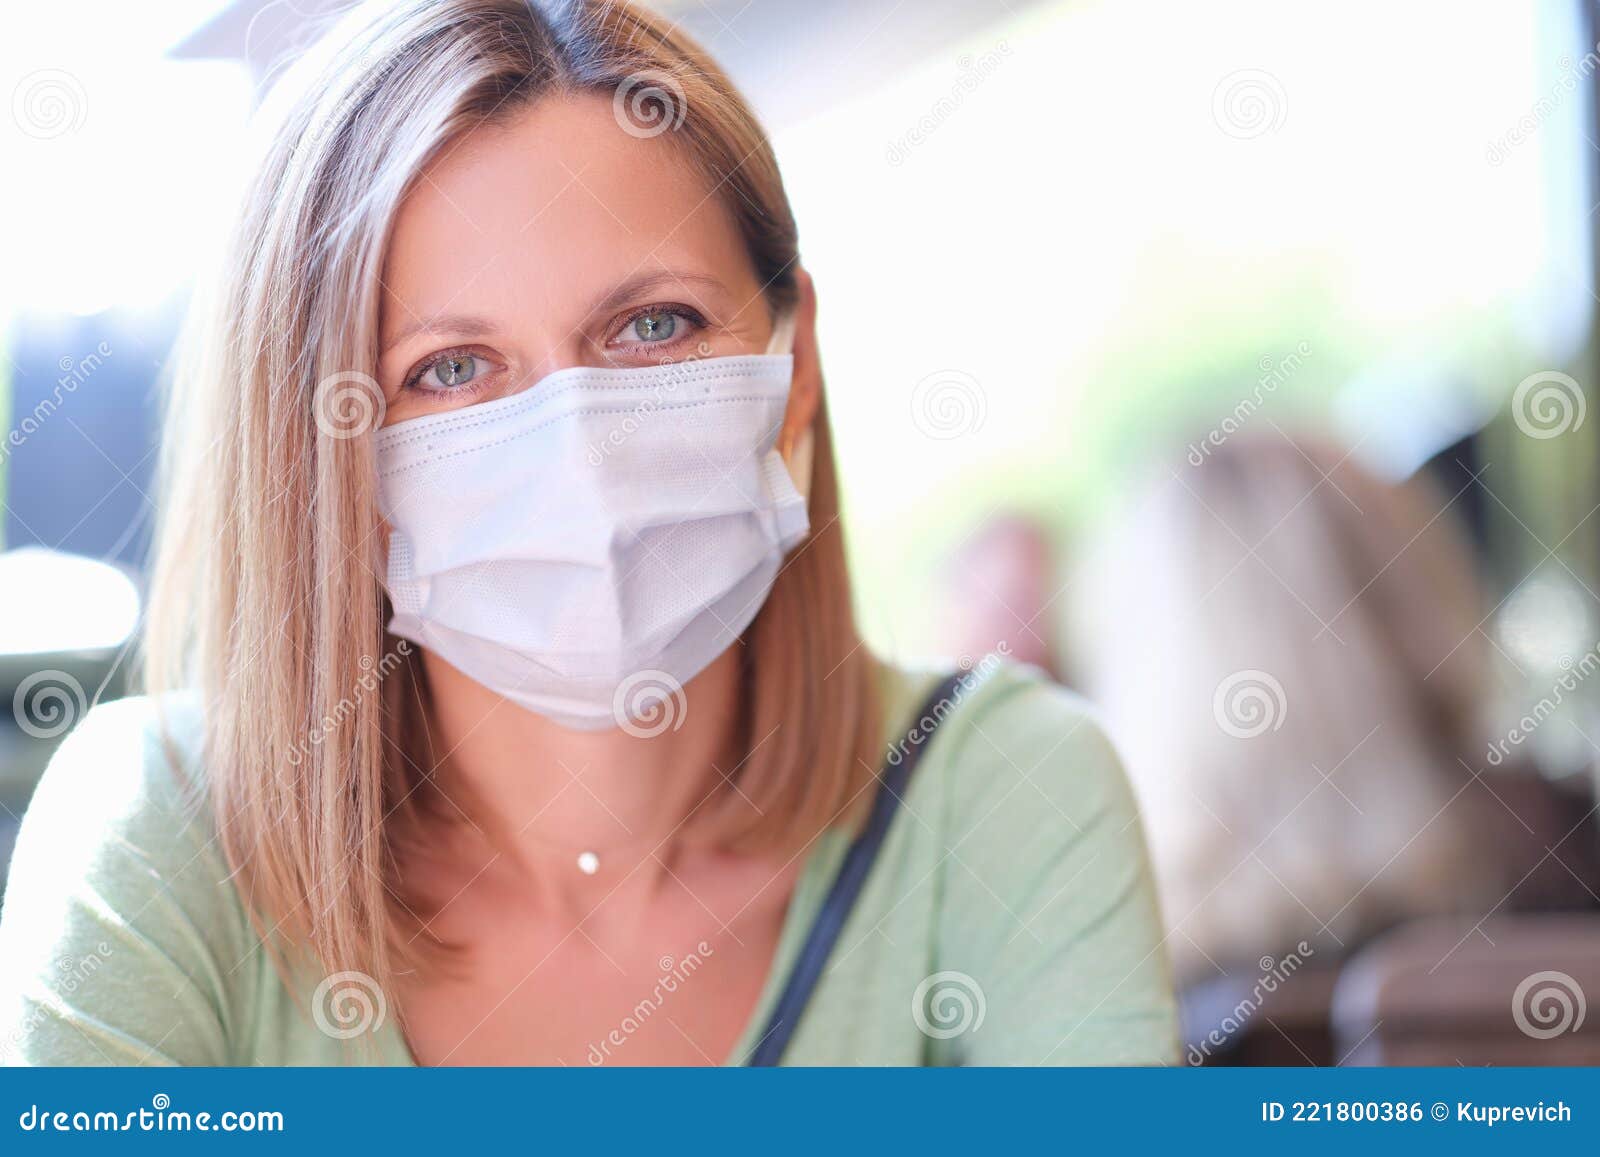 portrait of young beautiful woman in medical protective mask